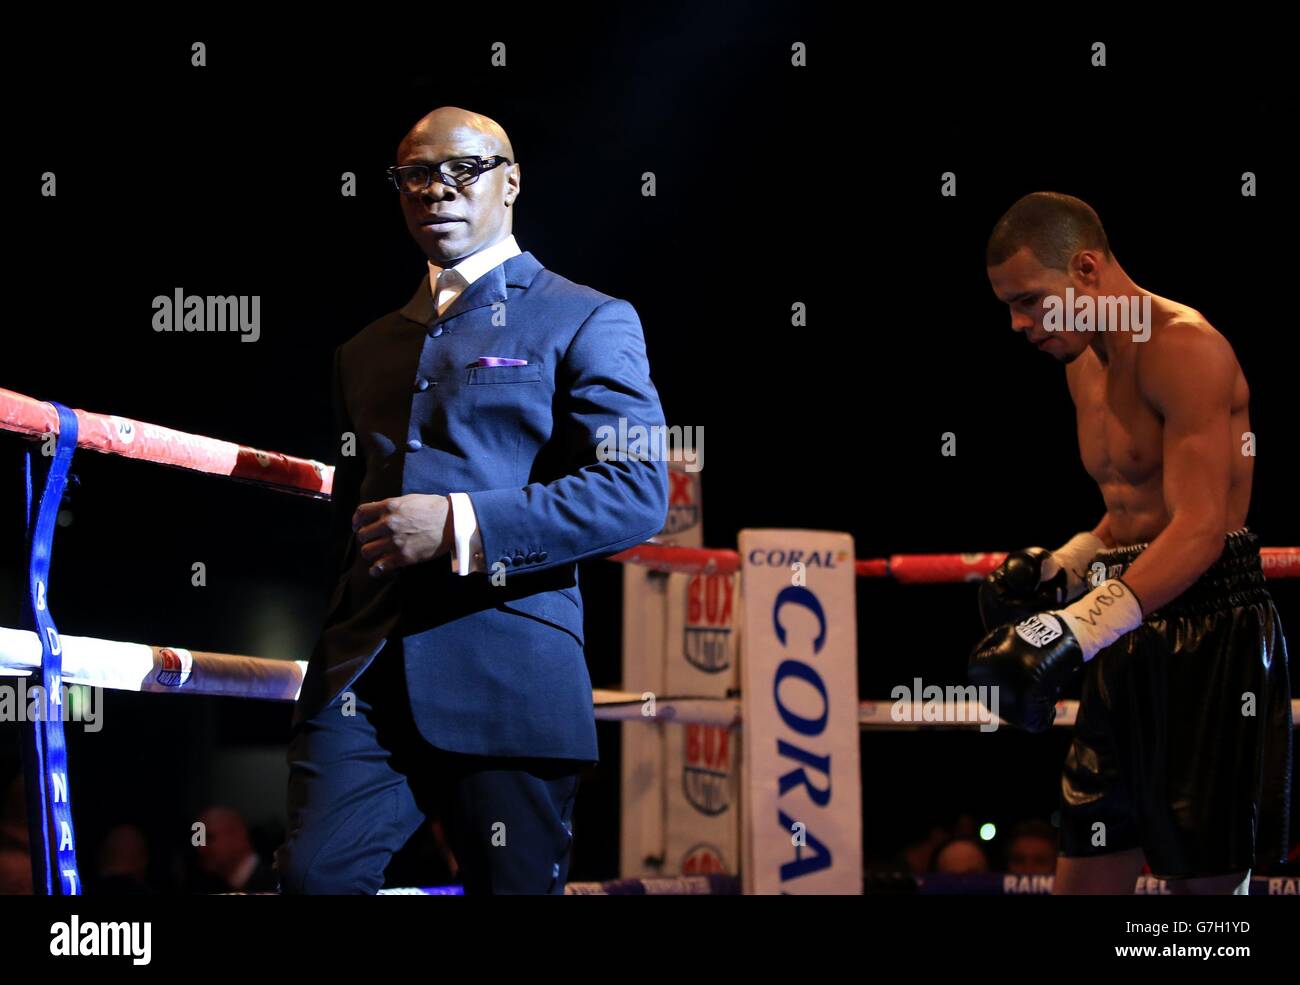 Chris Eubank leads his son, Chris Eubank Junior, out of the ring after he lost to Billy Joe Saunders in their British European and Commonwealth middleweight title fight at the ExCel Arena, London. Stock Photo